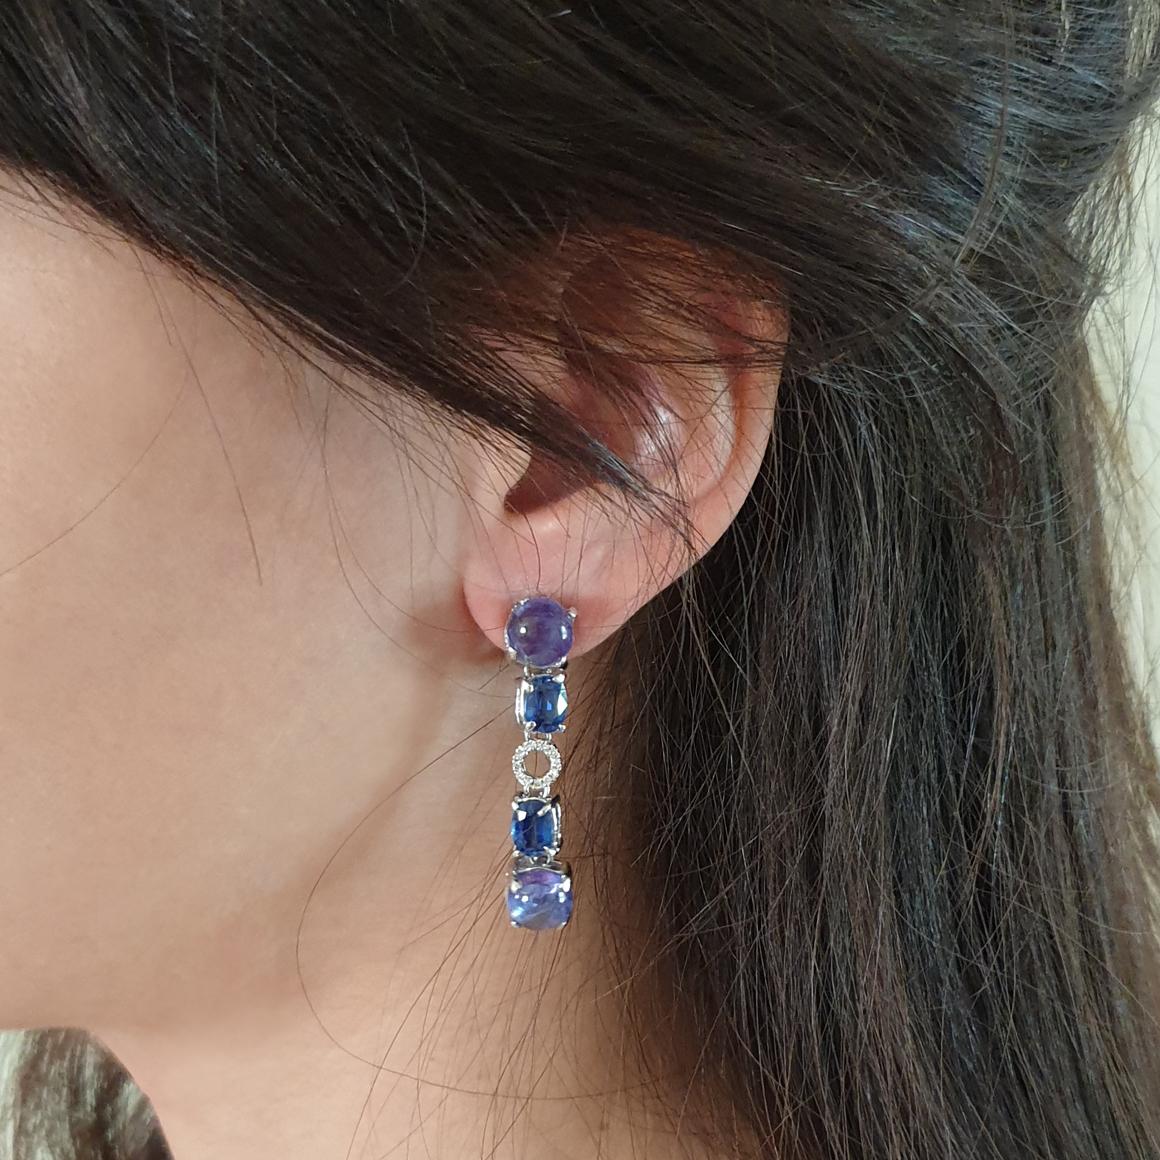 18Kt White Gold with White Diamonds and Tanzanite Earrings 2